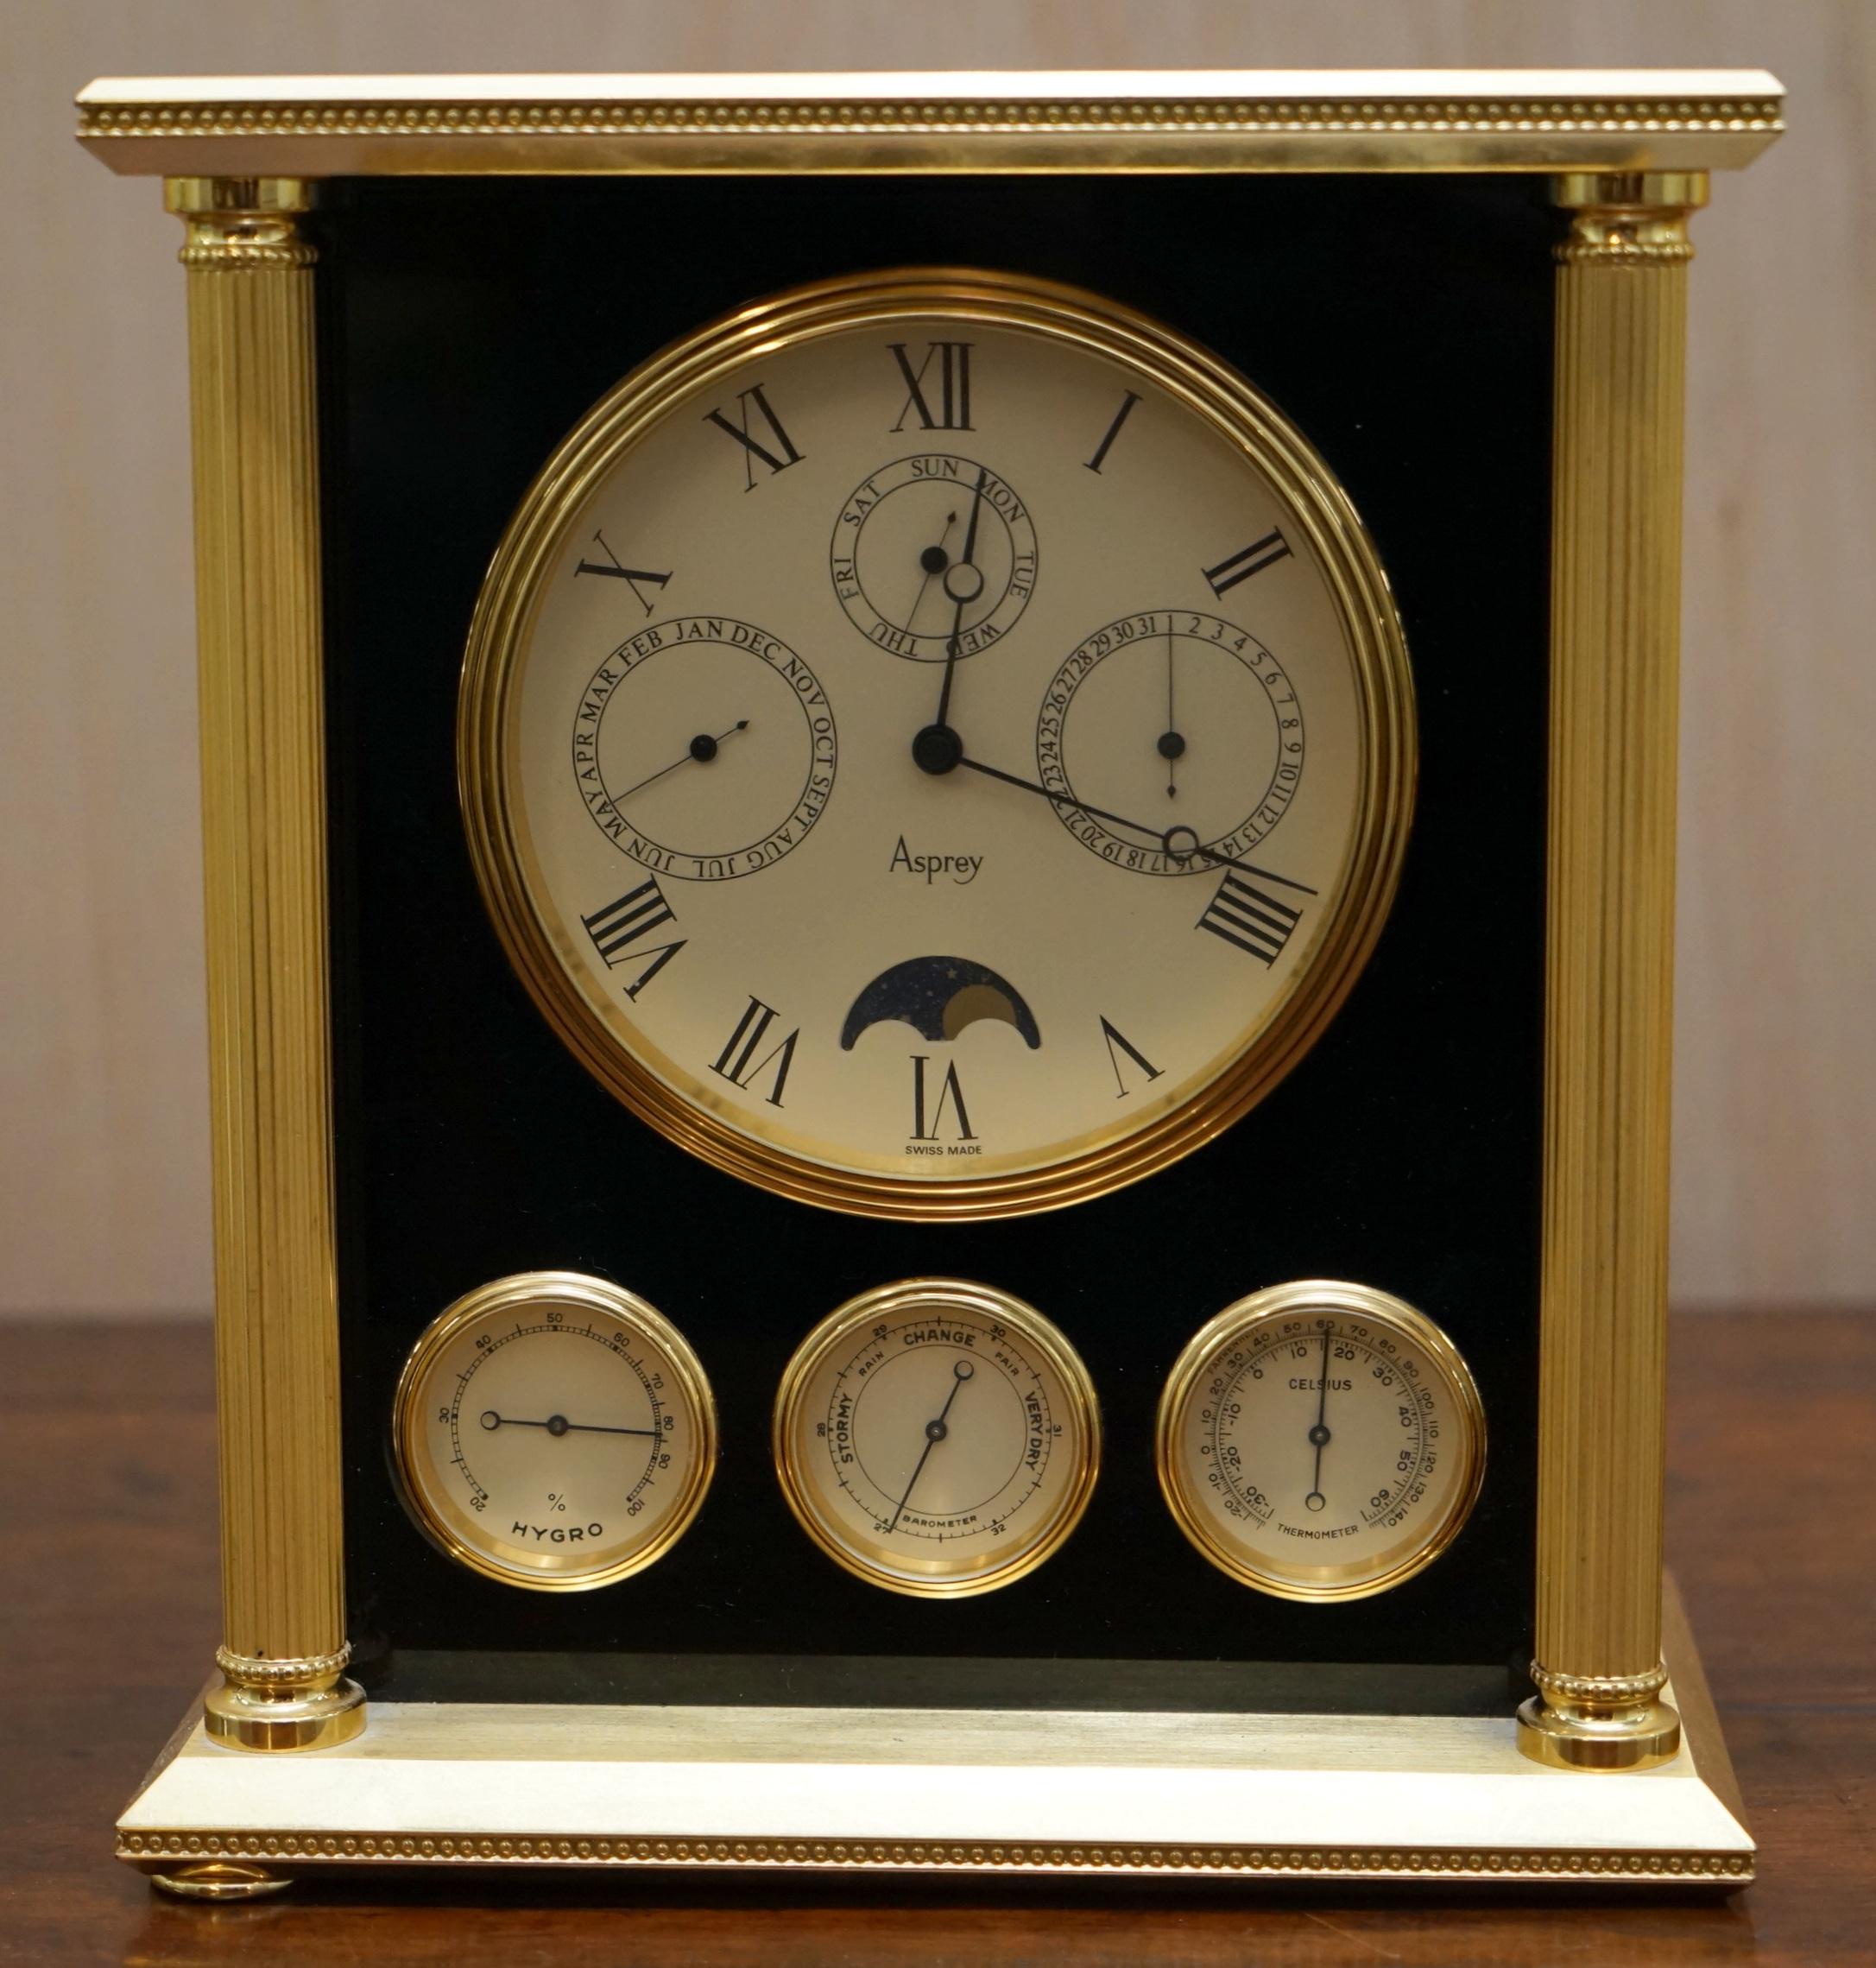 Wimbledon-Furniture

Wimbledon-Furniture is delighted to offer for sale this stunning exceptionally heavy solid brass with smoked glass panels Asprey London Swiss made mantle clock with built in Moon Phase, Calendar and Barometer

This clock has